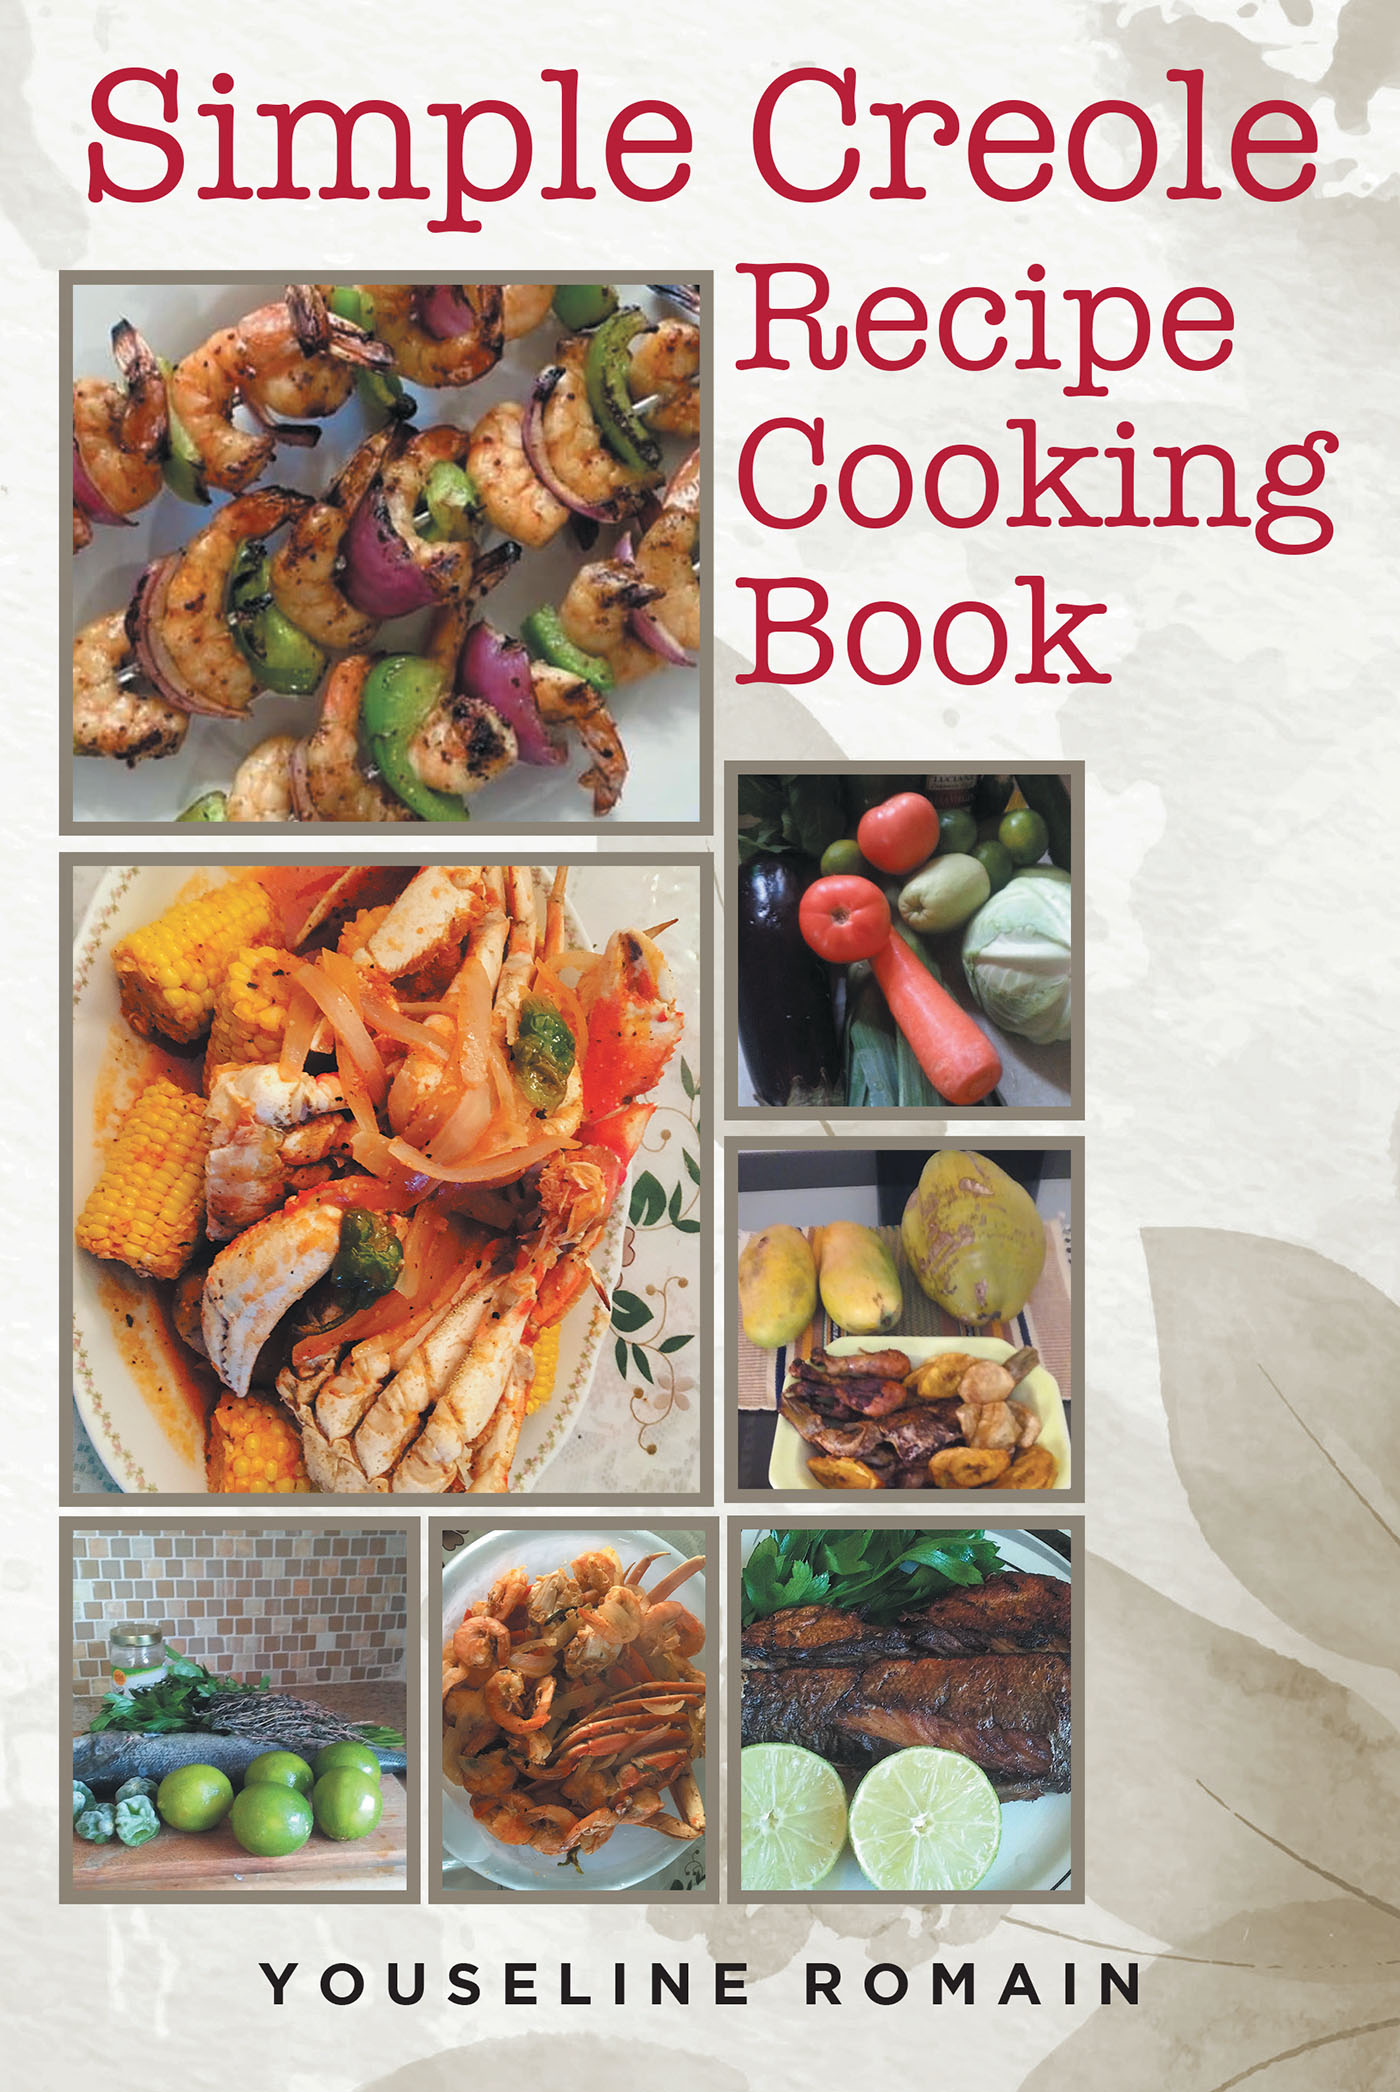 Simple Creole Recipe Cooking Book Cover Image